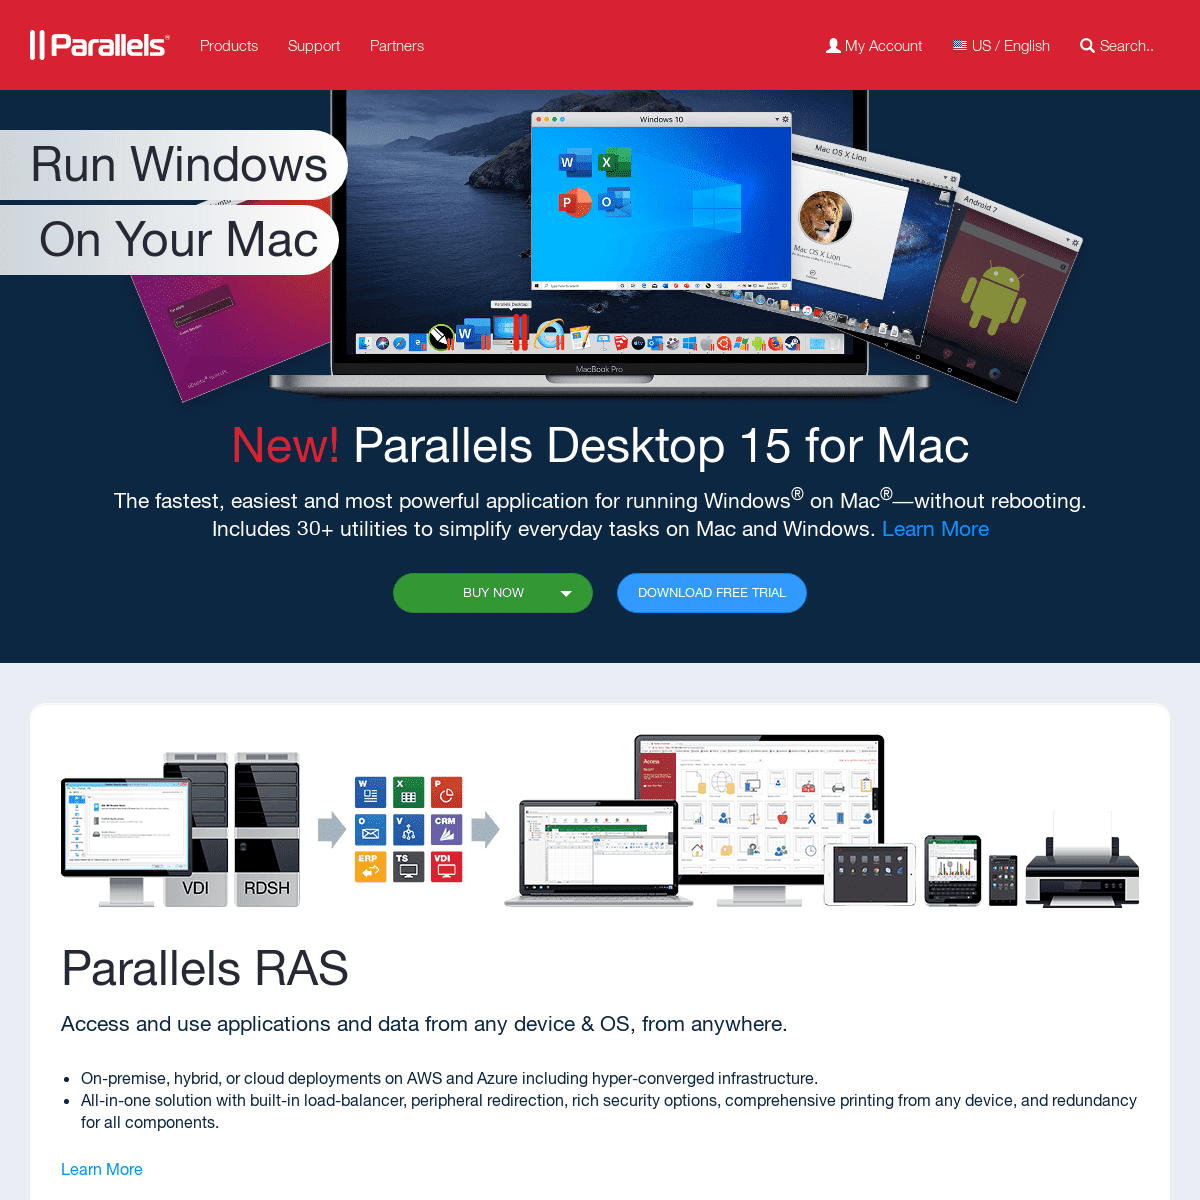 A complete backup of parallels.com